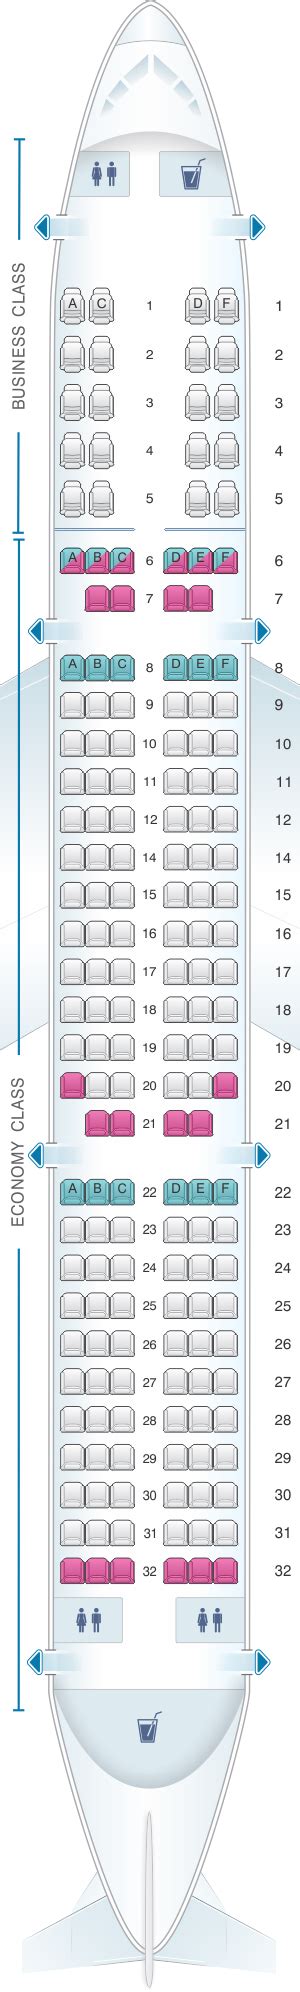 Flight seat map air india. The seating in Boeing 777-300ER is arranged in a 2-3-2 configuration. There will be a total of 35 seats in the business class section including three rows of 21 seats in the forward cabin and two rows of 14 seats in a mini-cabin behind. Various Entertainment Options – Get ready to enjoy your long-haul flight on Air India 777 business class ... 